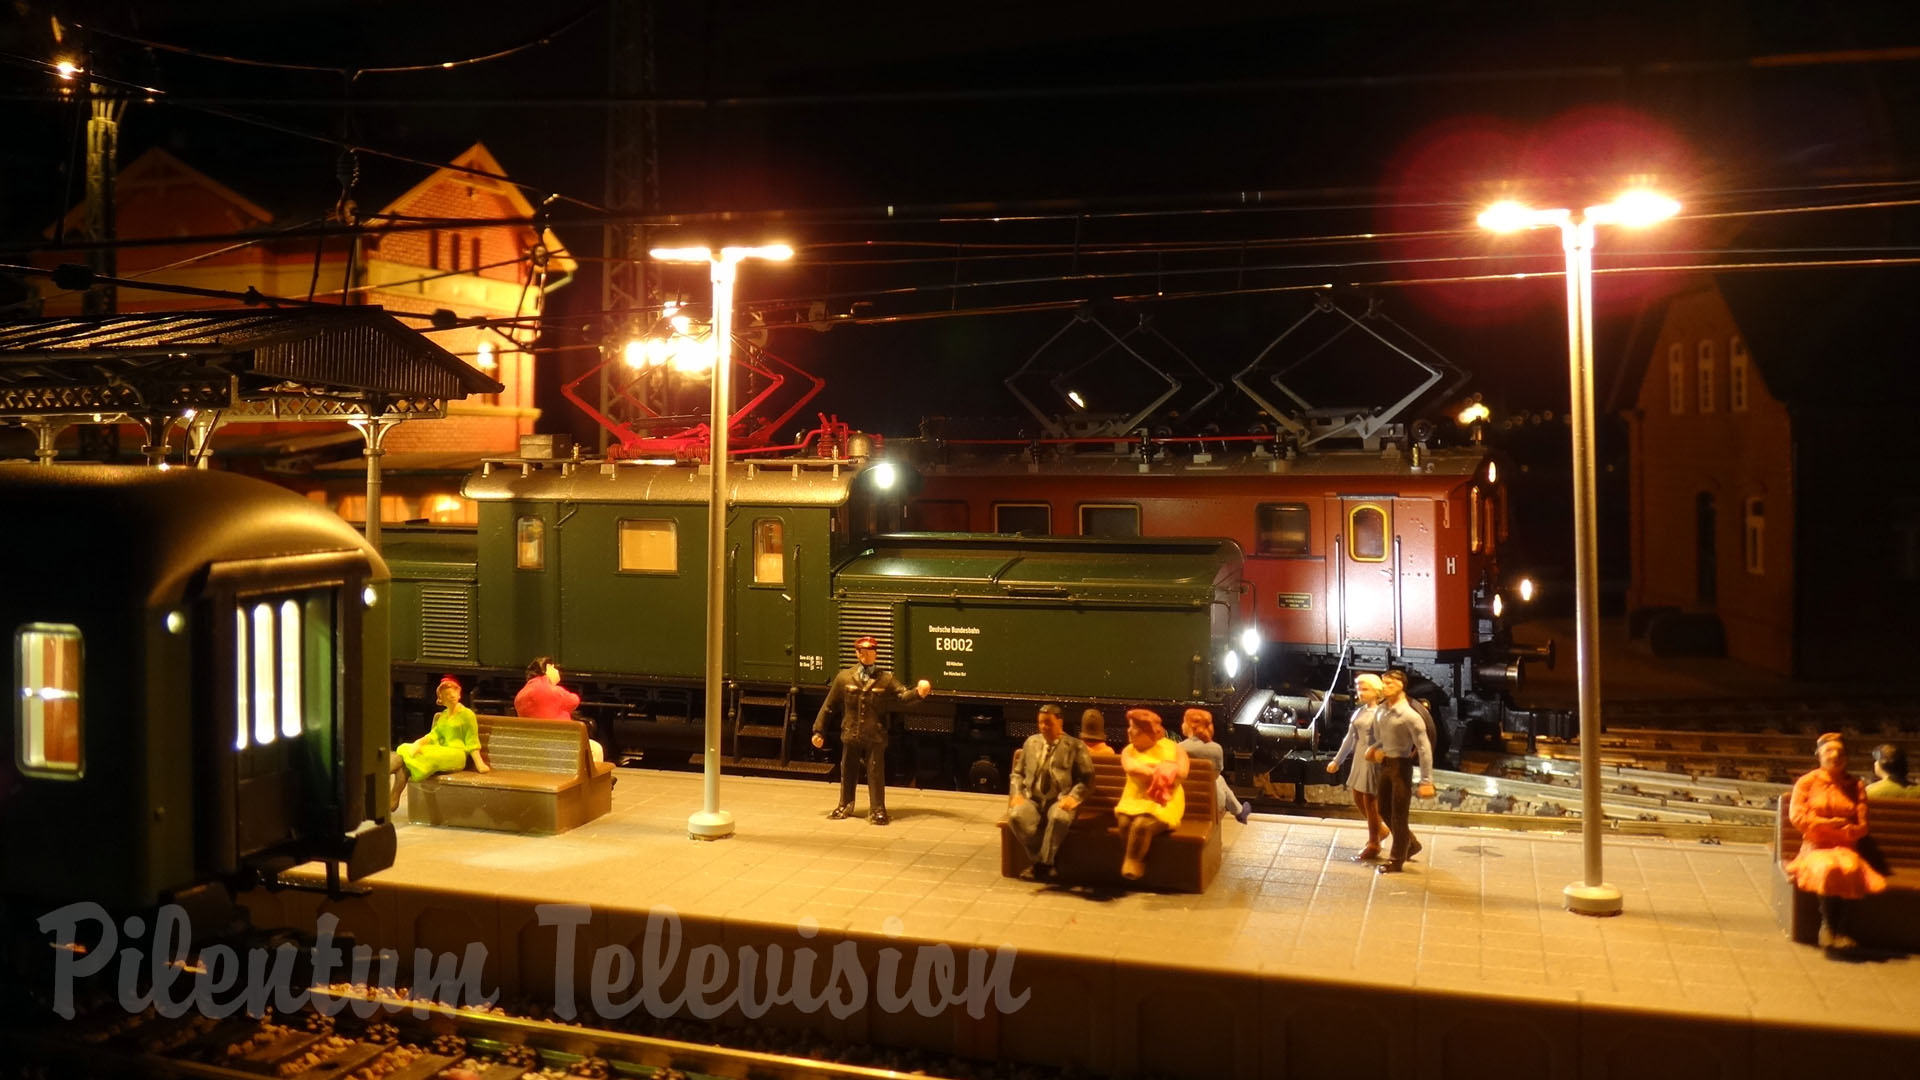 One of the finest German model railway layouts in small spaces - HO scale model train layout by Ignacio O'Callaghan